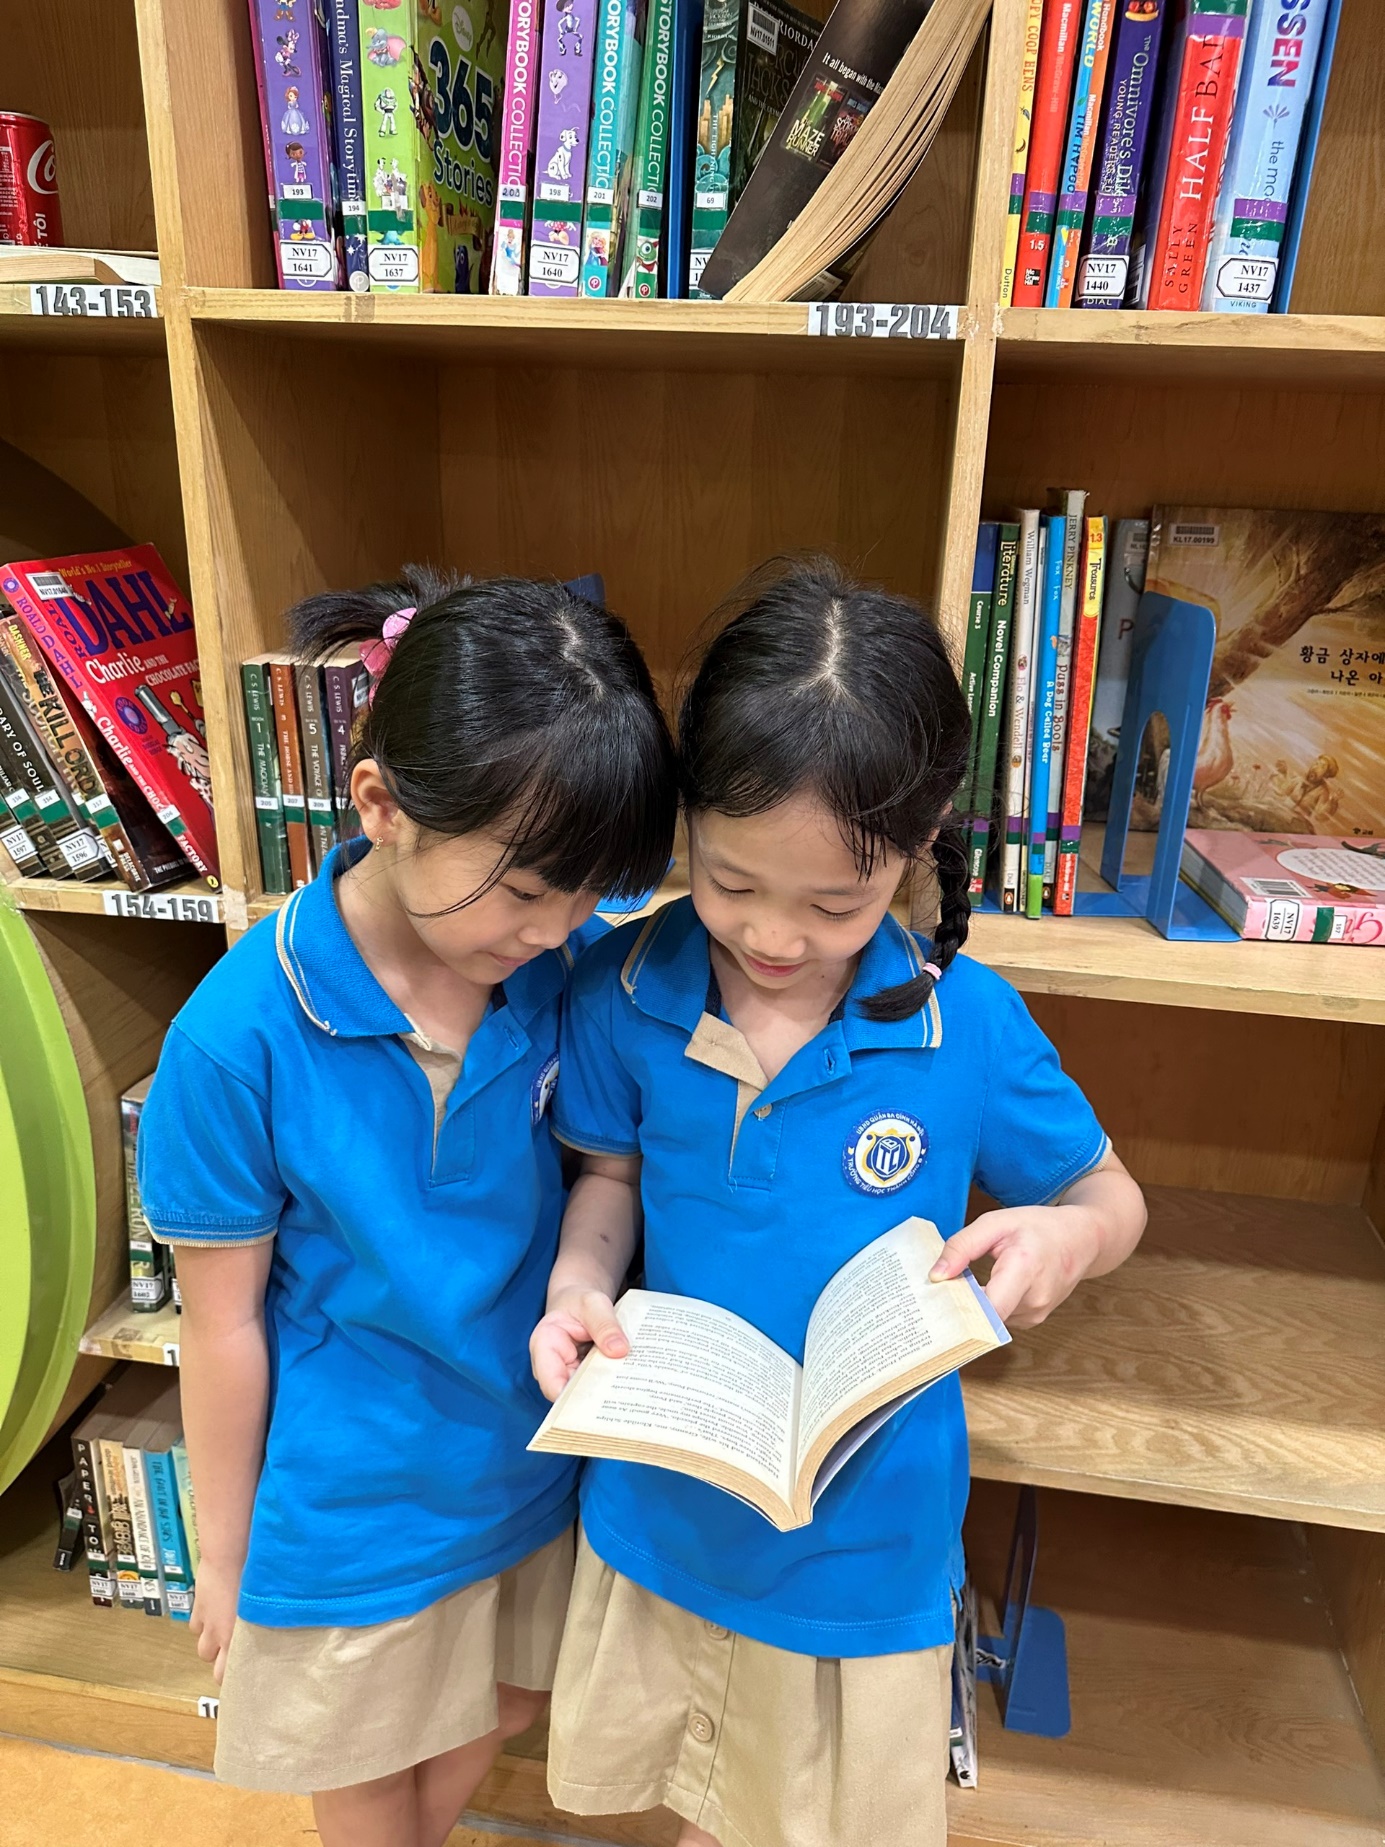 Two children in blue shirts reading a book in a library

Description automatically generated